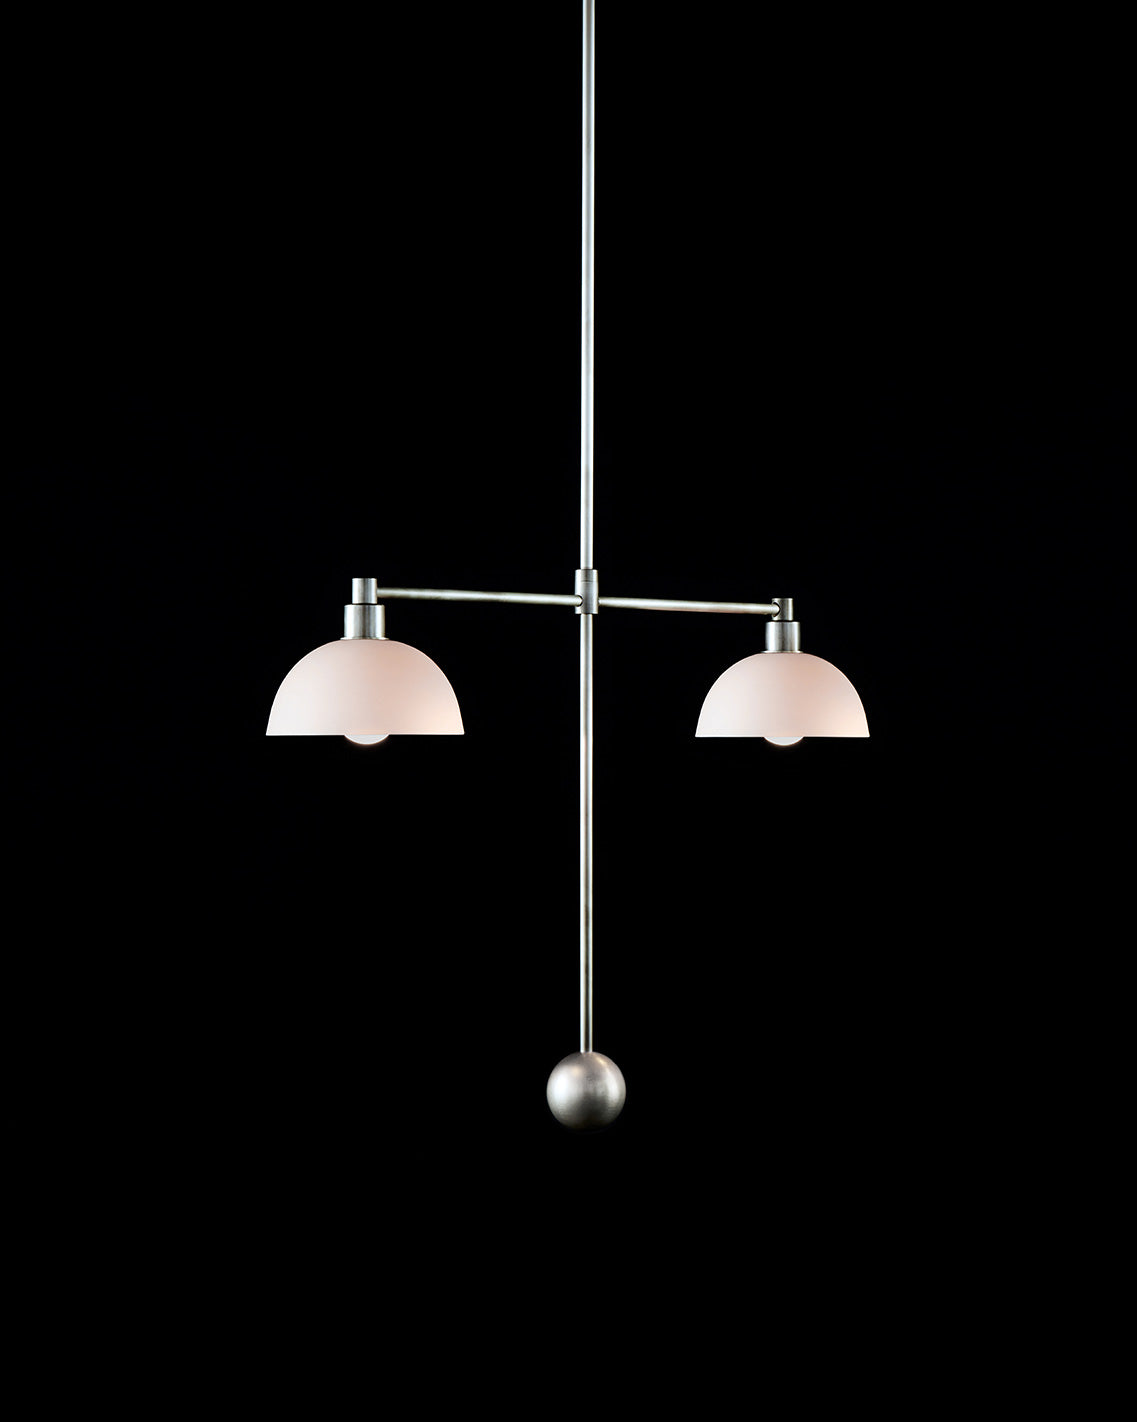 TRAPEZE : 2 MOBILE ceiling pendant in Tarnished Silver finish with porcelain bowls, hanging against a black background. 